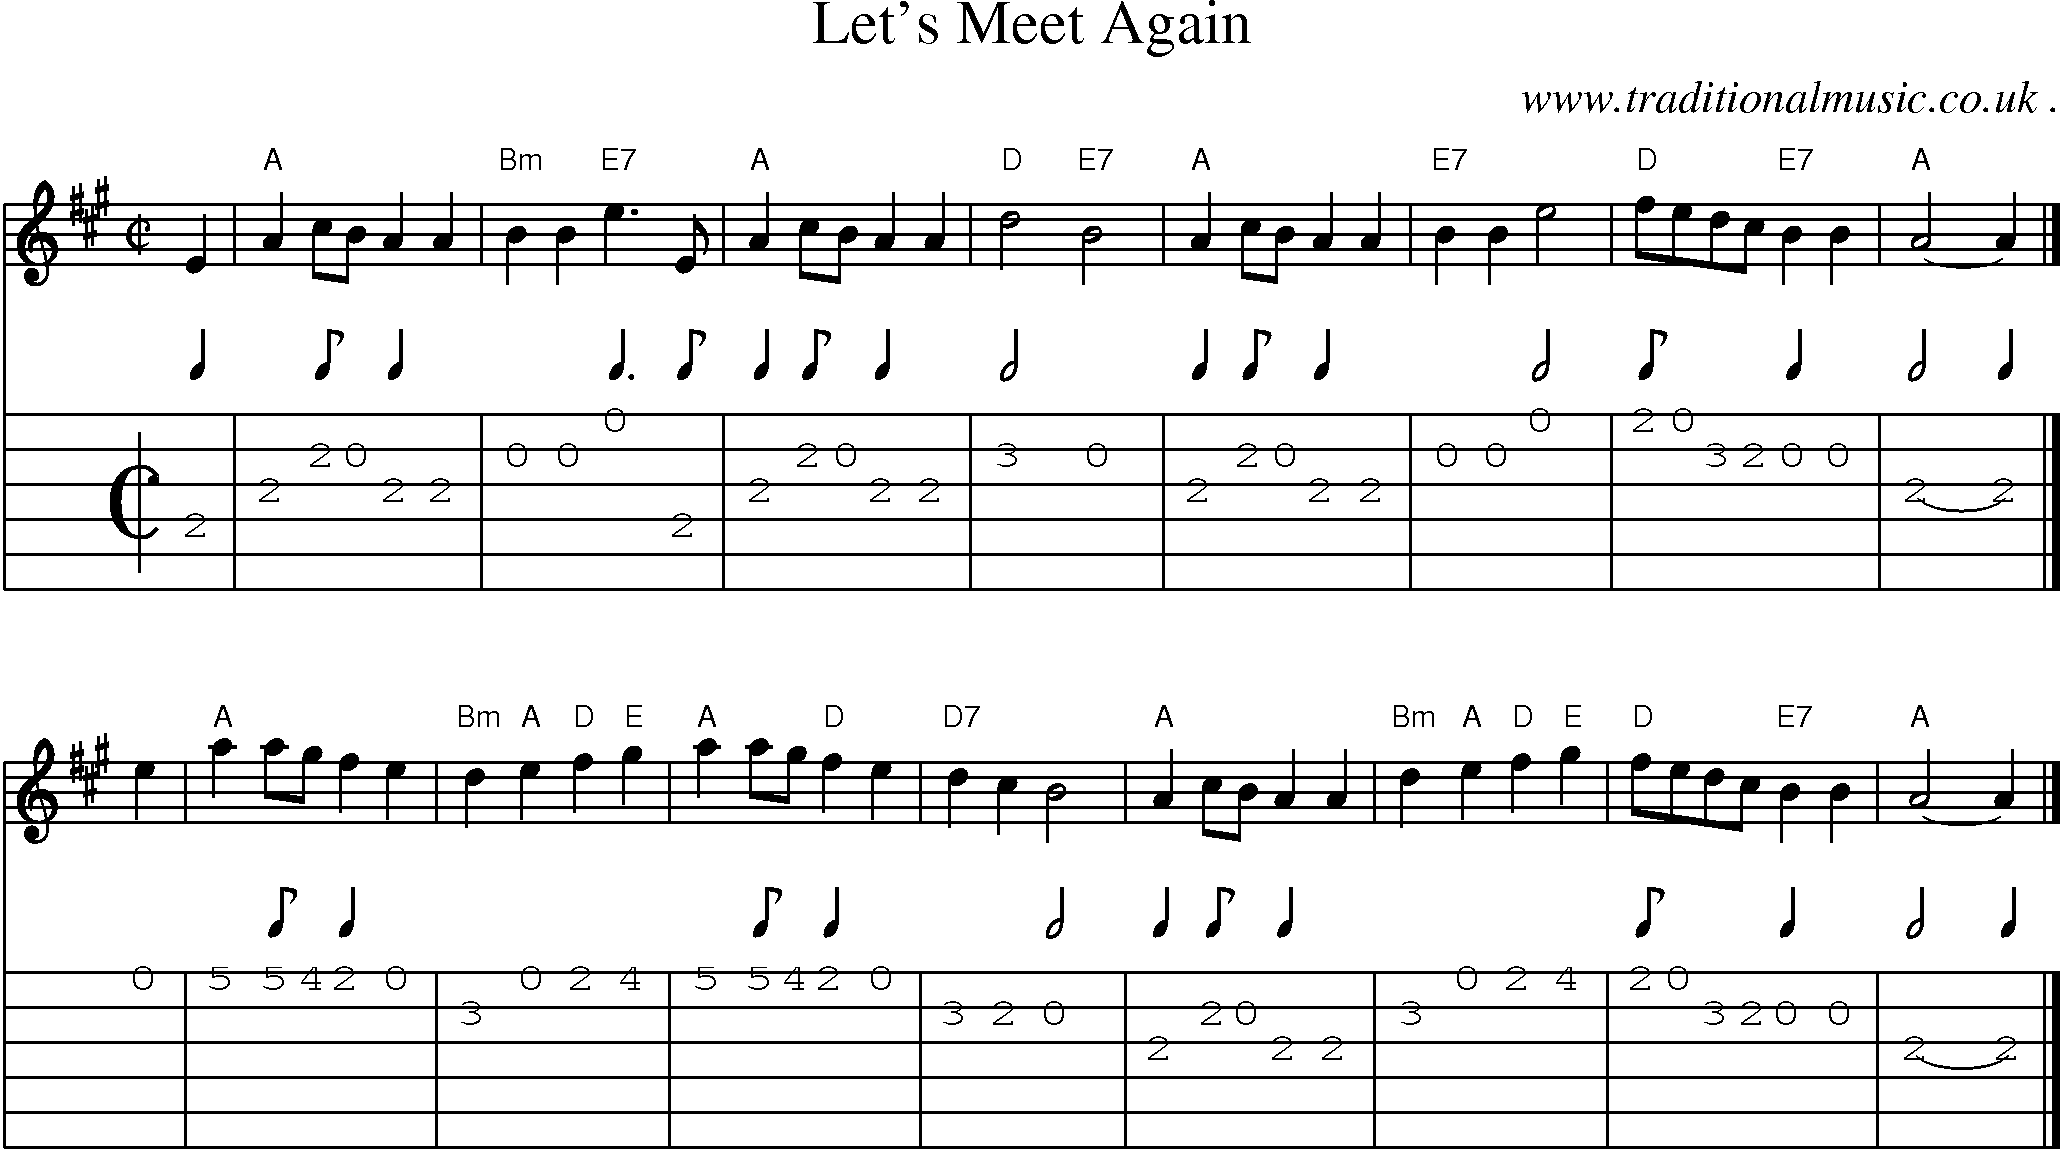 Sheet-music  score, Chords and Guitar Tabs for Lets Meet Again